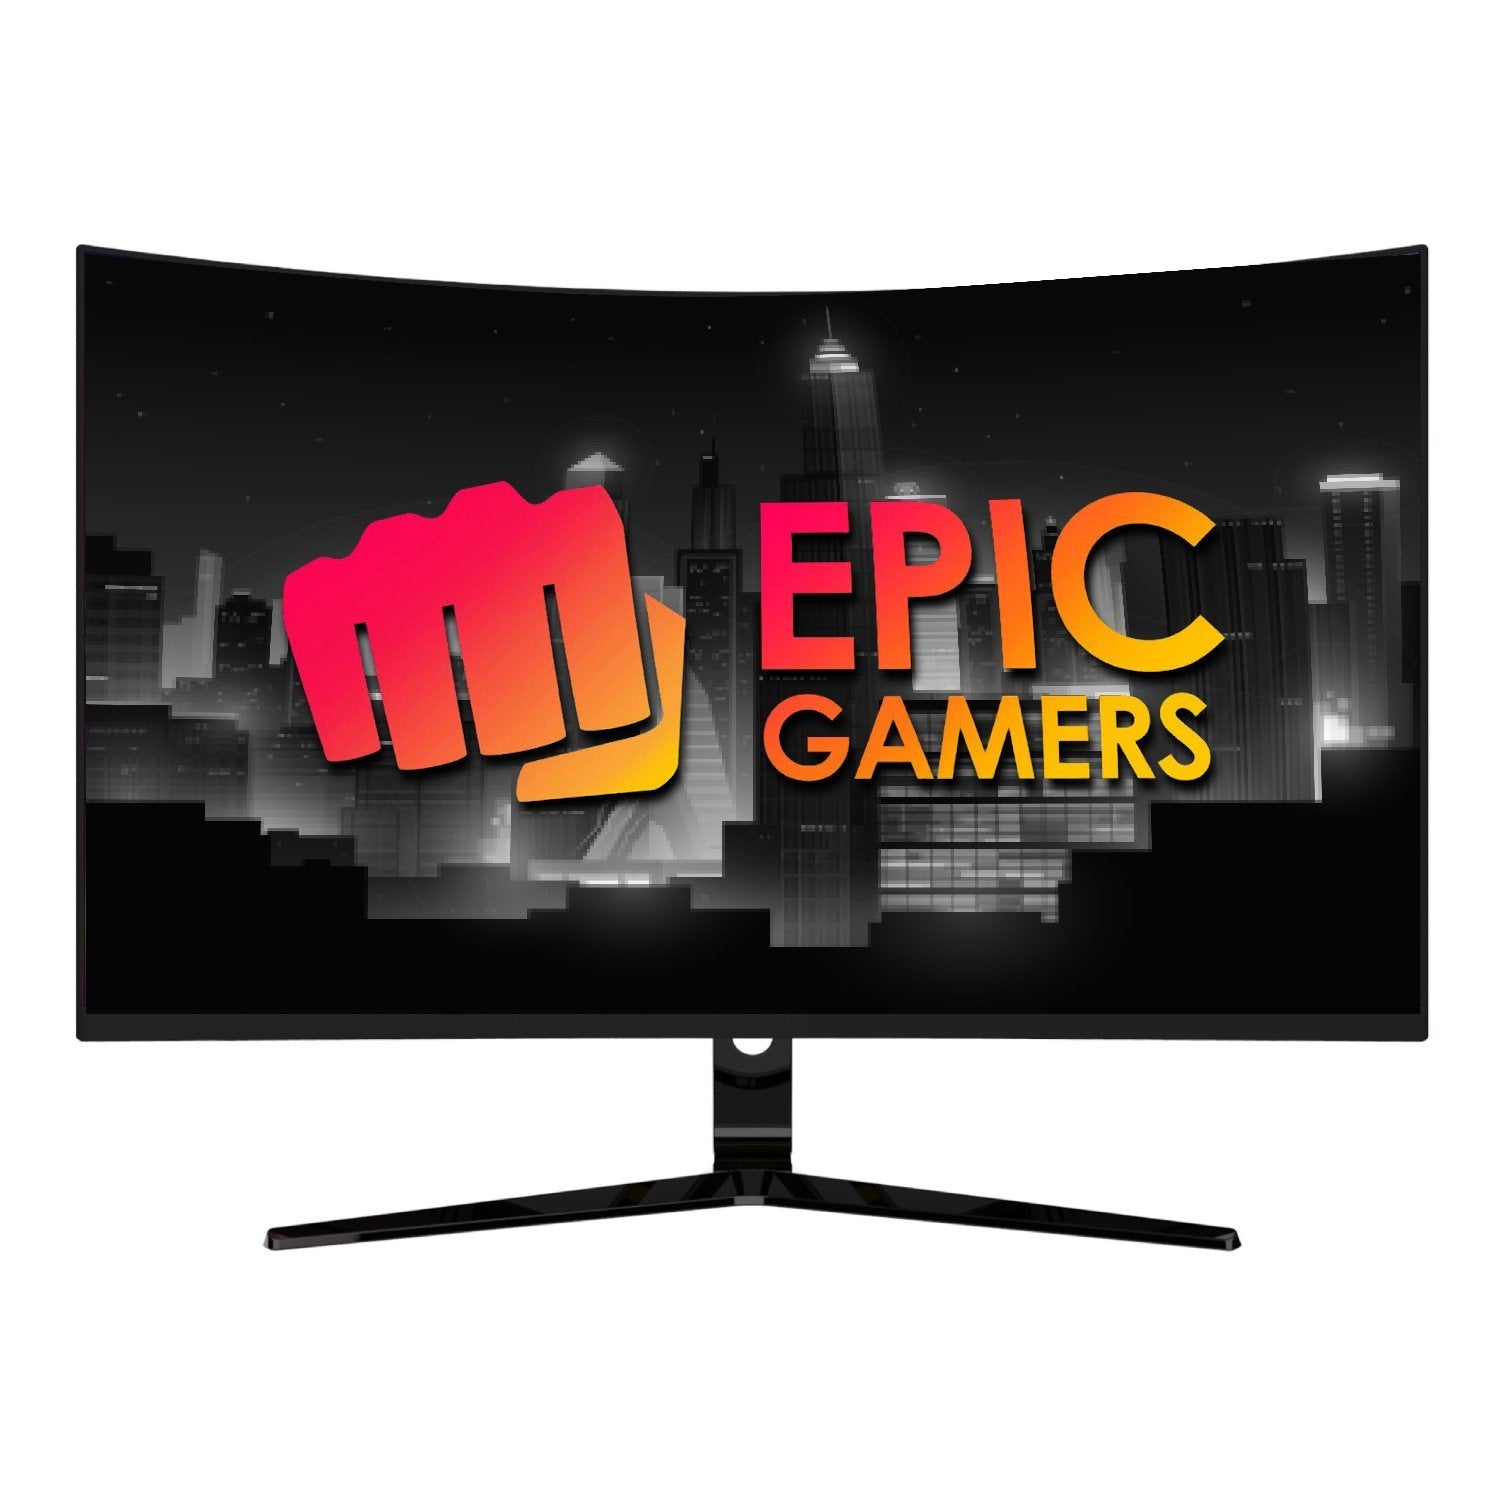 Epic Gamers 27 Inch QHD, 144hz, 1MS, FreeSync, G-SYNC Curved Gaming Monitor - Store 974 | ستور ٩٧٤